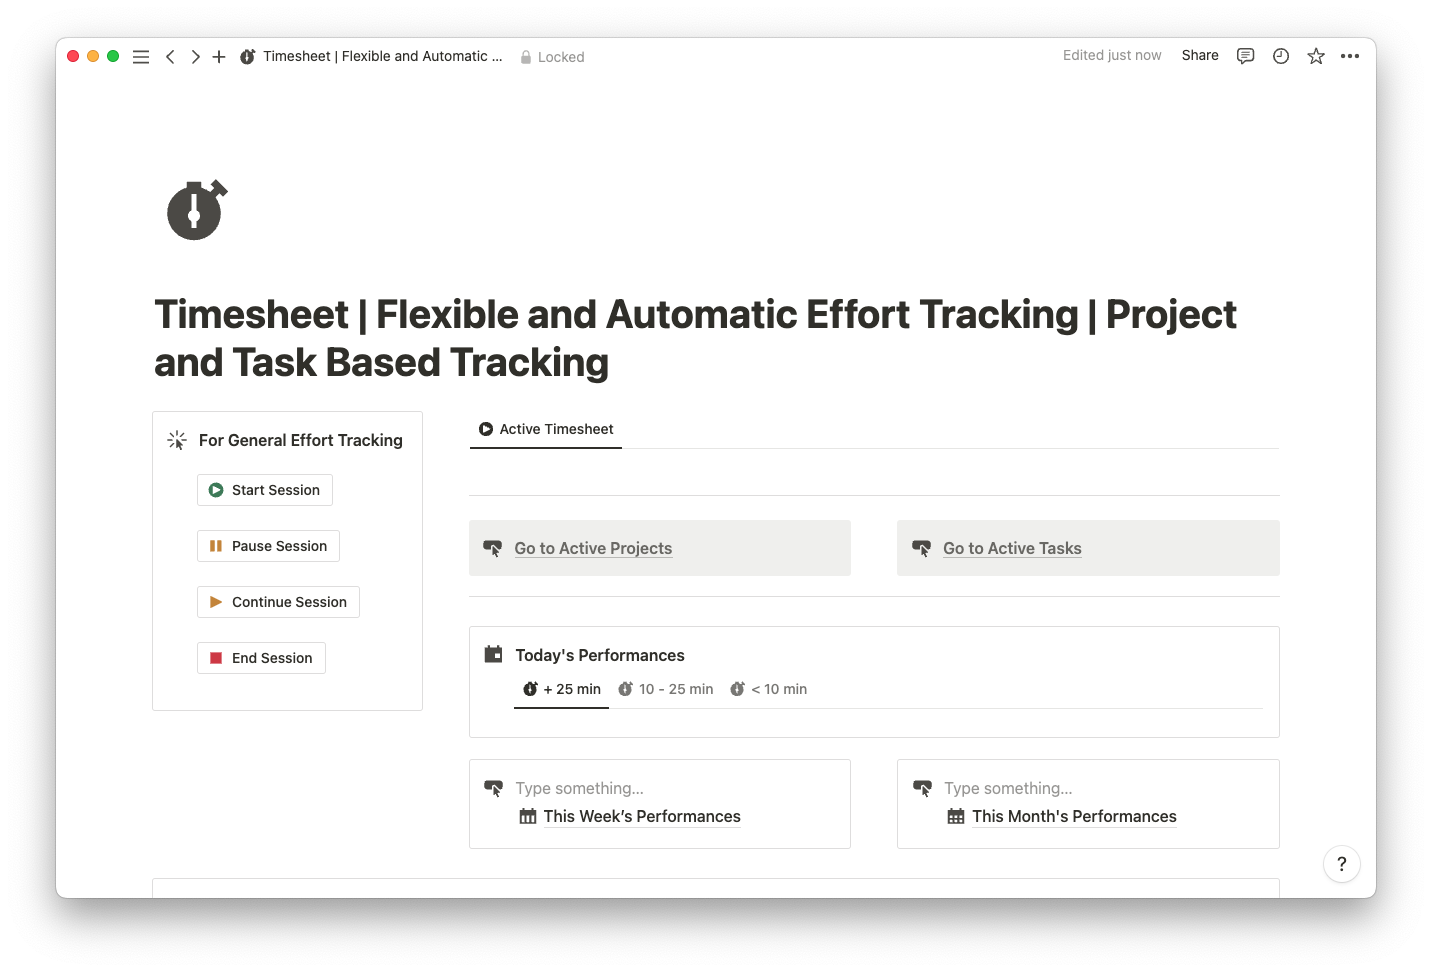 Fast Tracking In Project Management: Benefits & Implementation